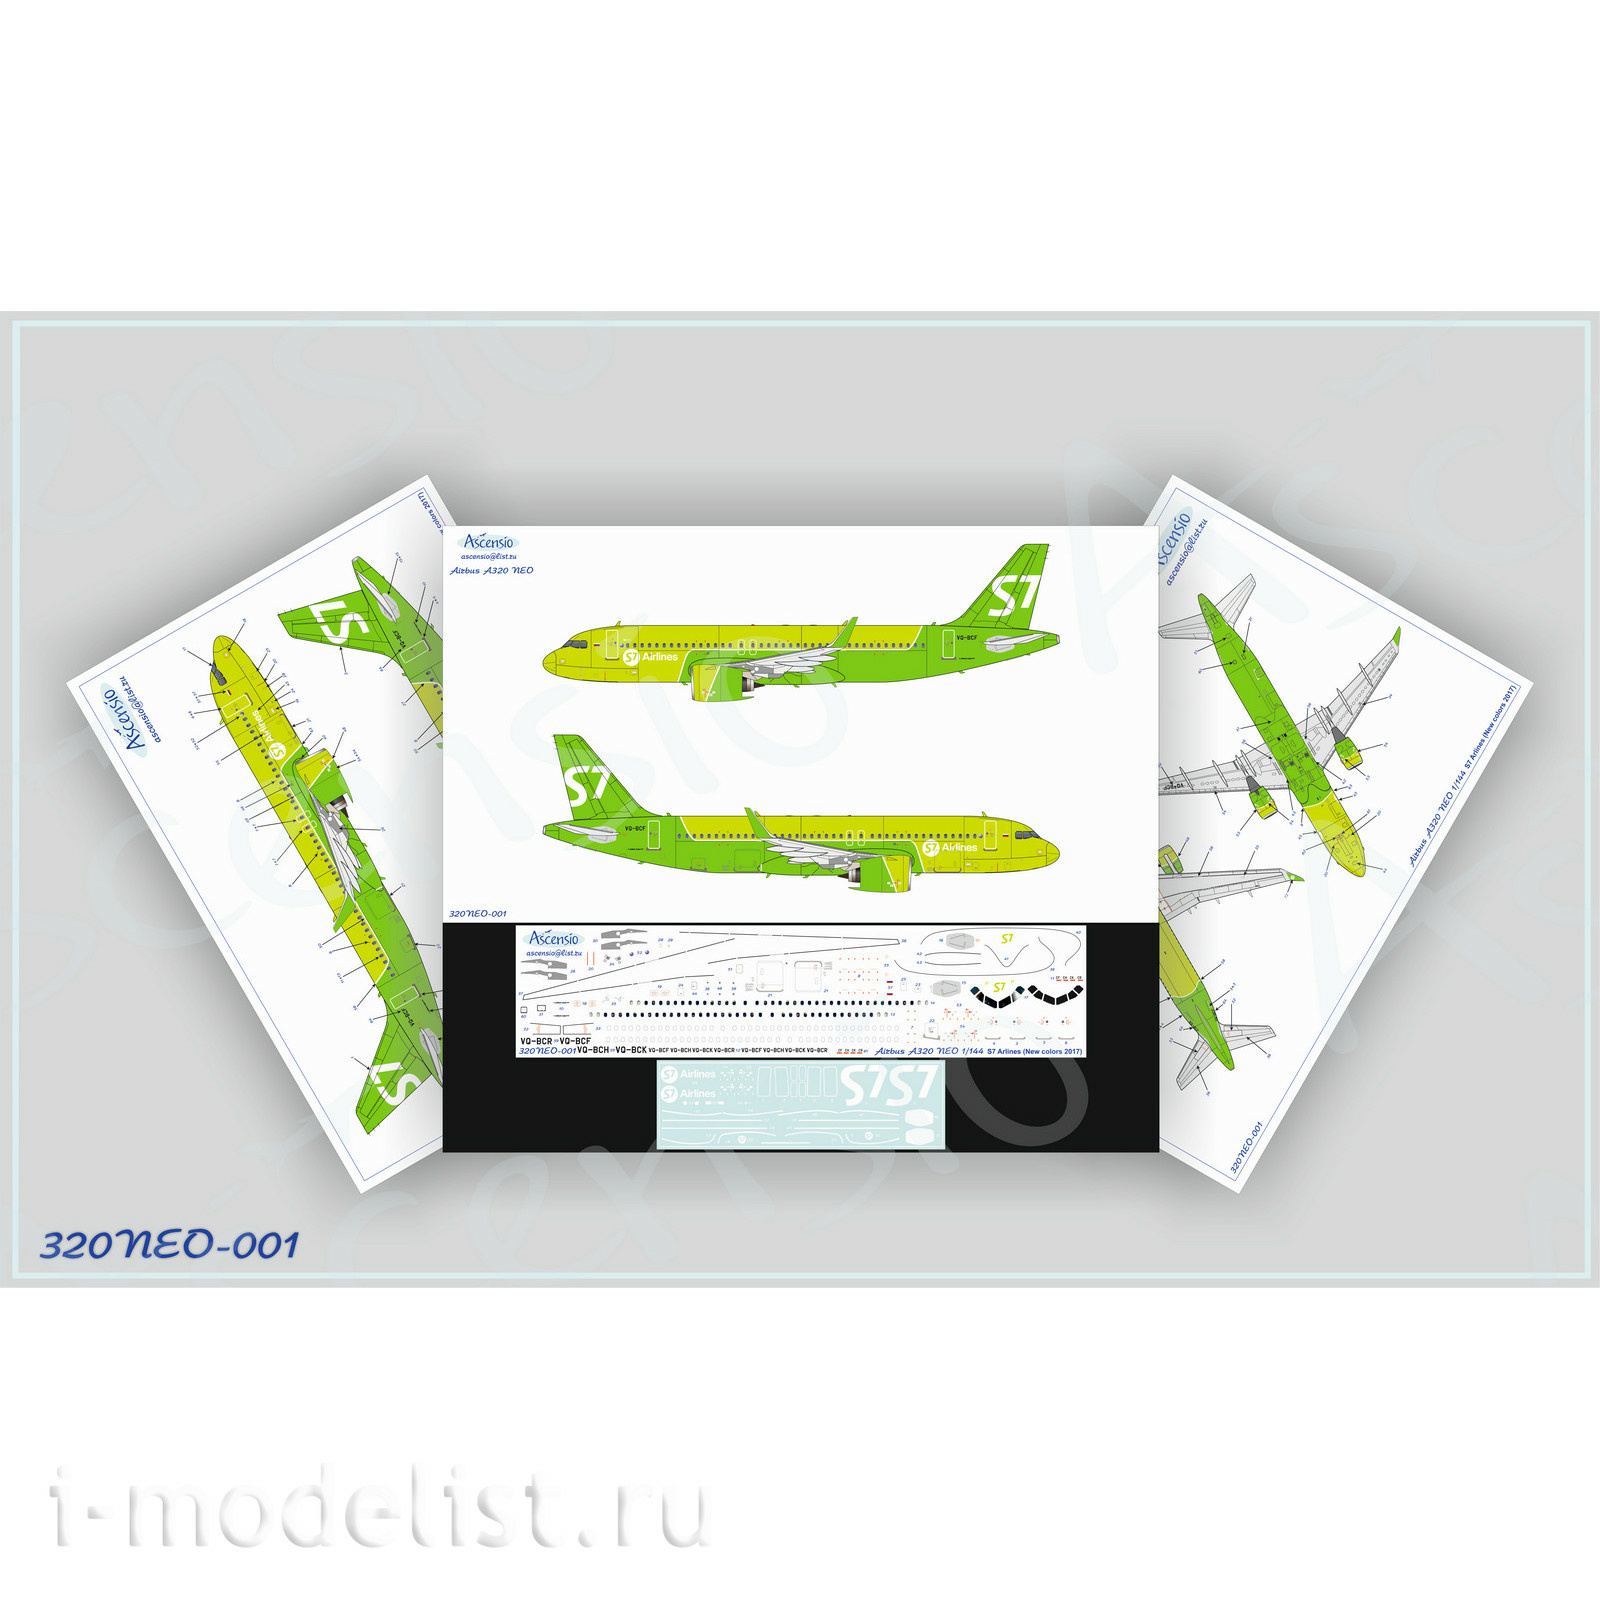 320NEO-001 Ascensio 1/144 Декаль на самолёт Airbus A320NEO (S7 Airlines new colors 2017)